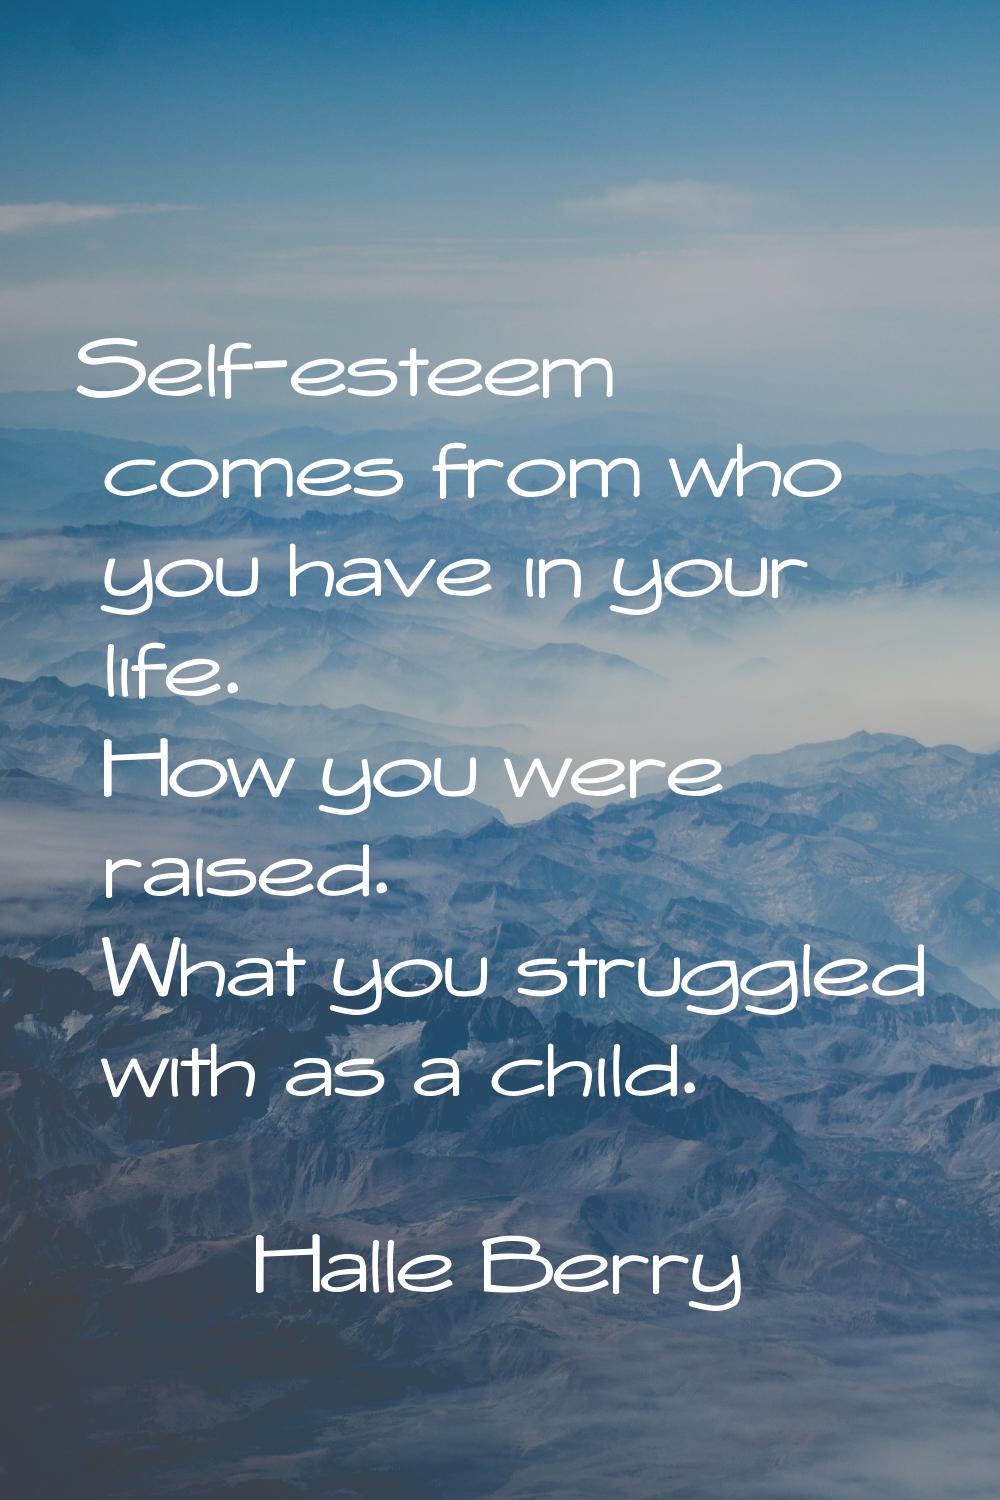 Self-esteem comes from who you have in your life. How you were raised. What you struggled with as a